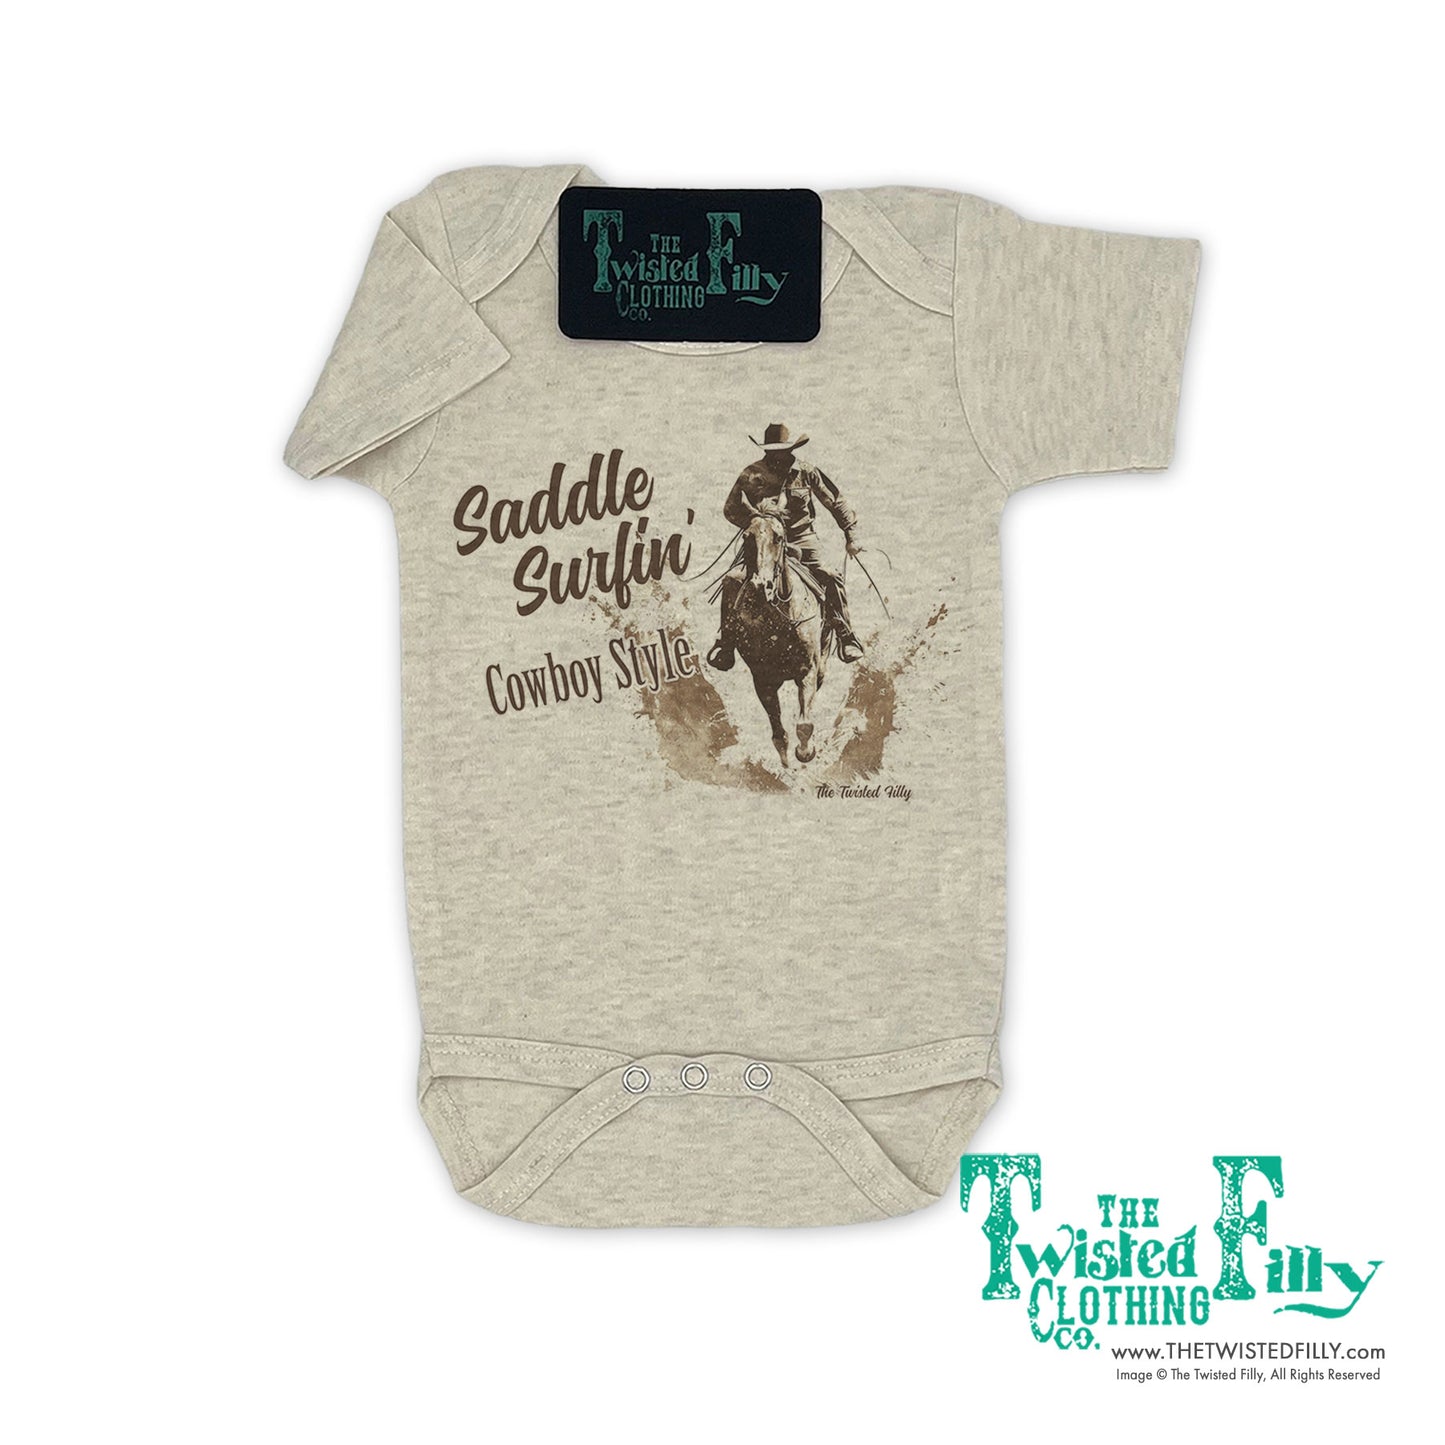 Saddle Surfin' Cowboy Style - S/S Boys Infant One Piece - Assorted Colors